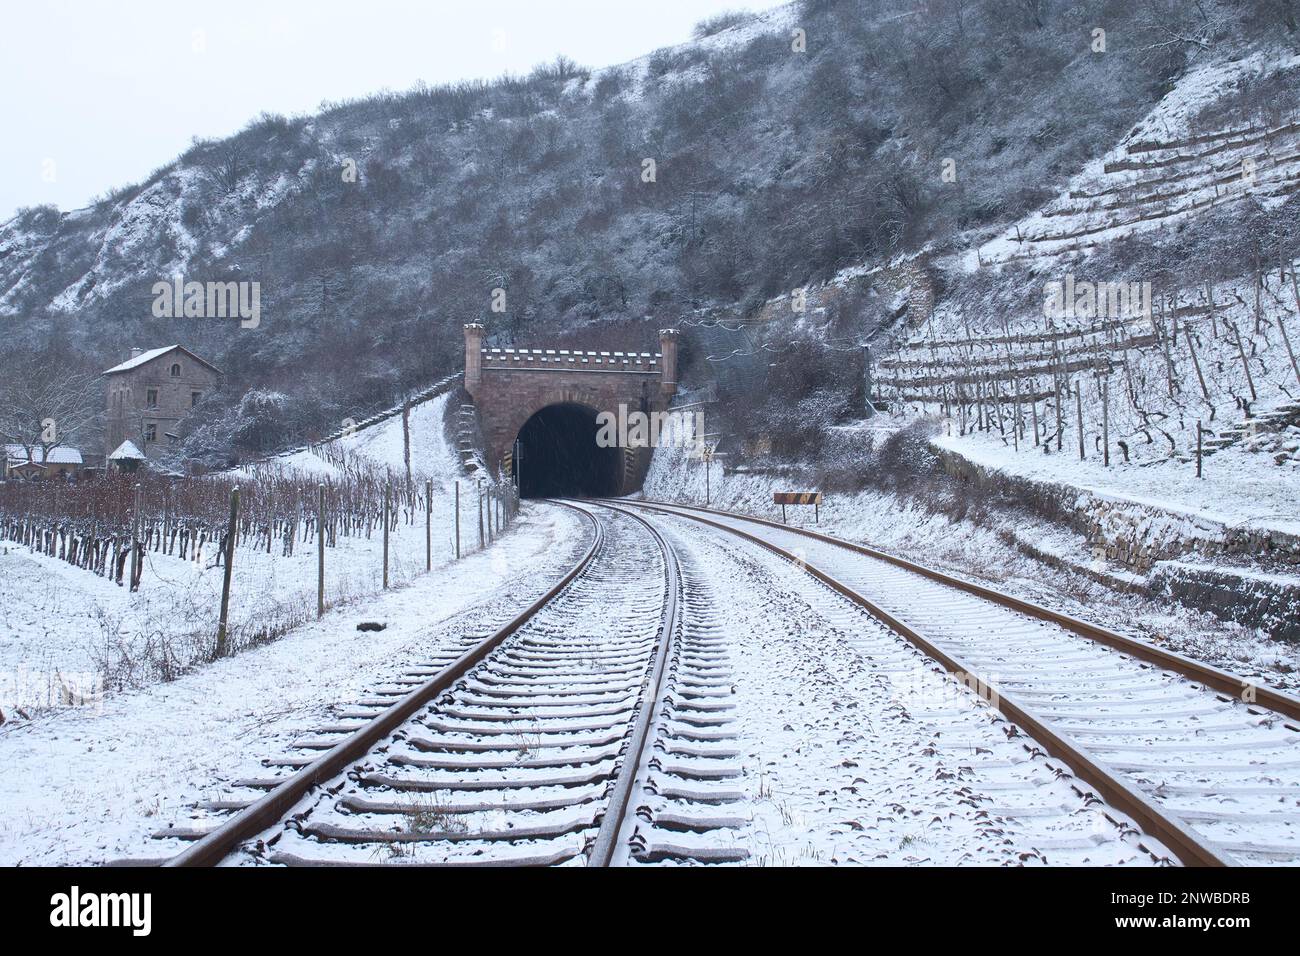 Bad Kreuznach, Germany - February 8, 2021: Rail tracks leading to tunnel through Rotenfels on a cold, grey, snowy winter day in Germany. Stock Photo